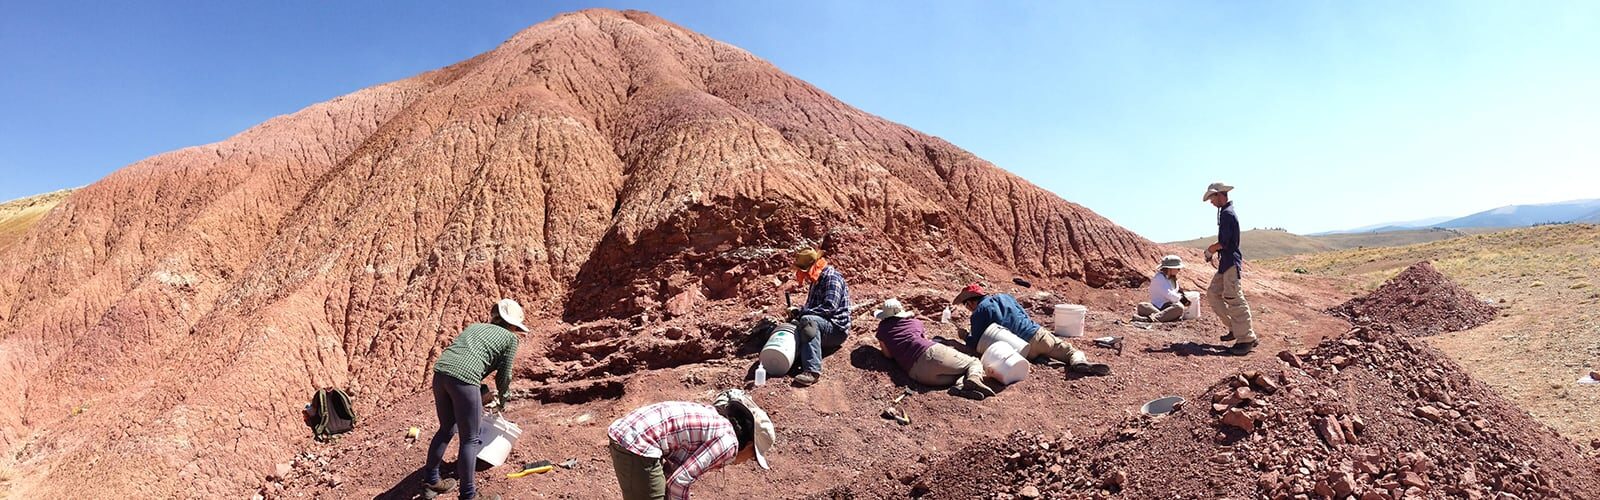 A group excavates on a hillside.